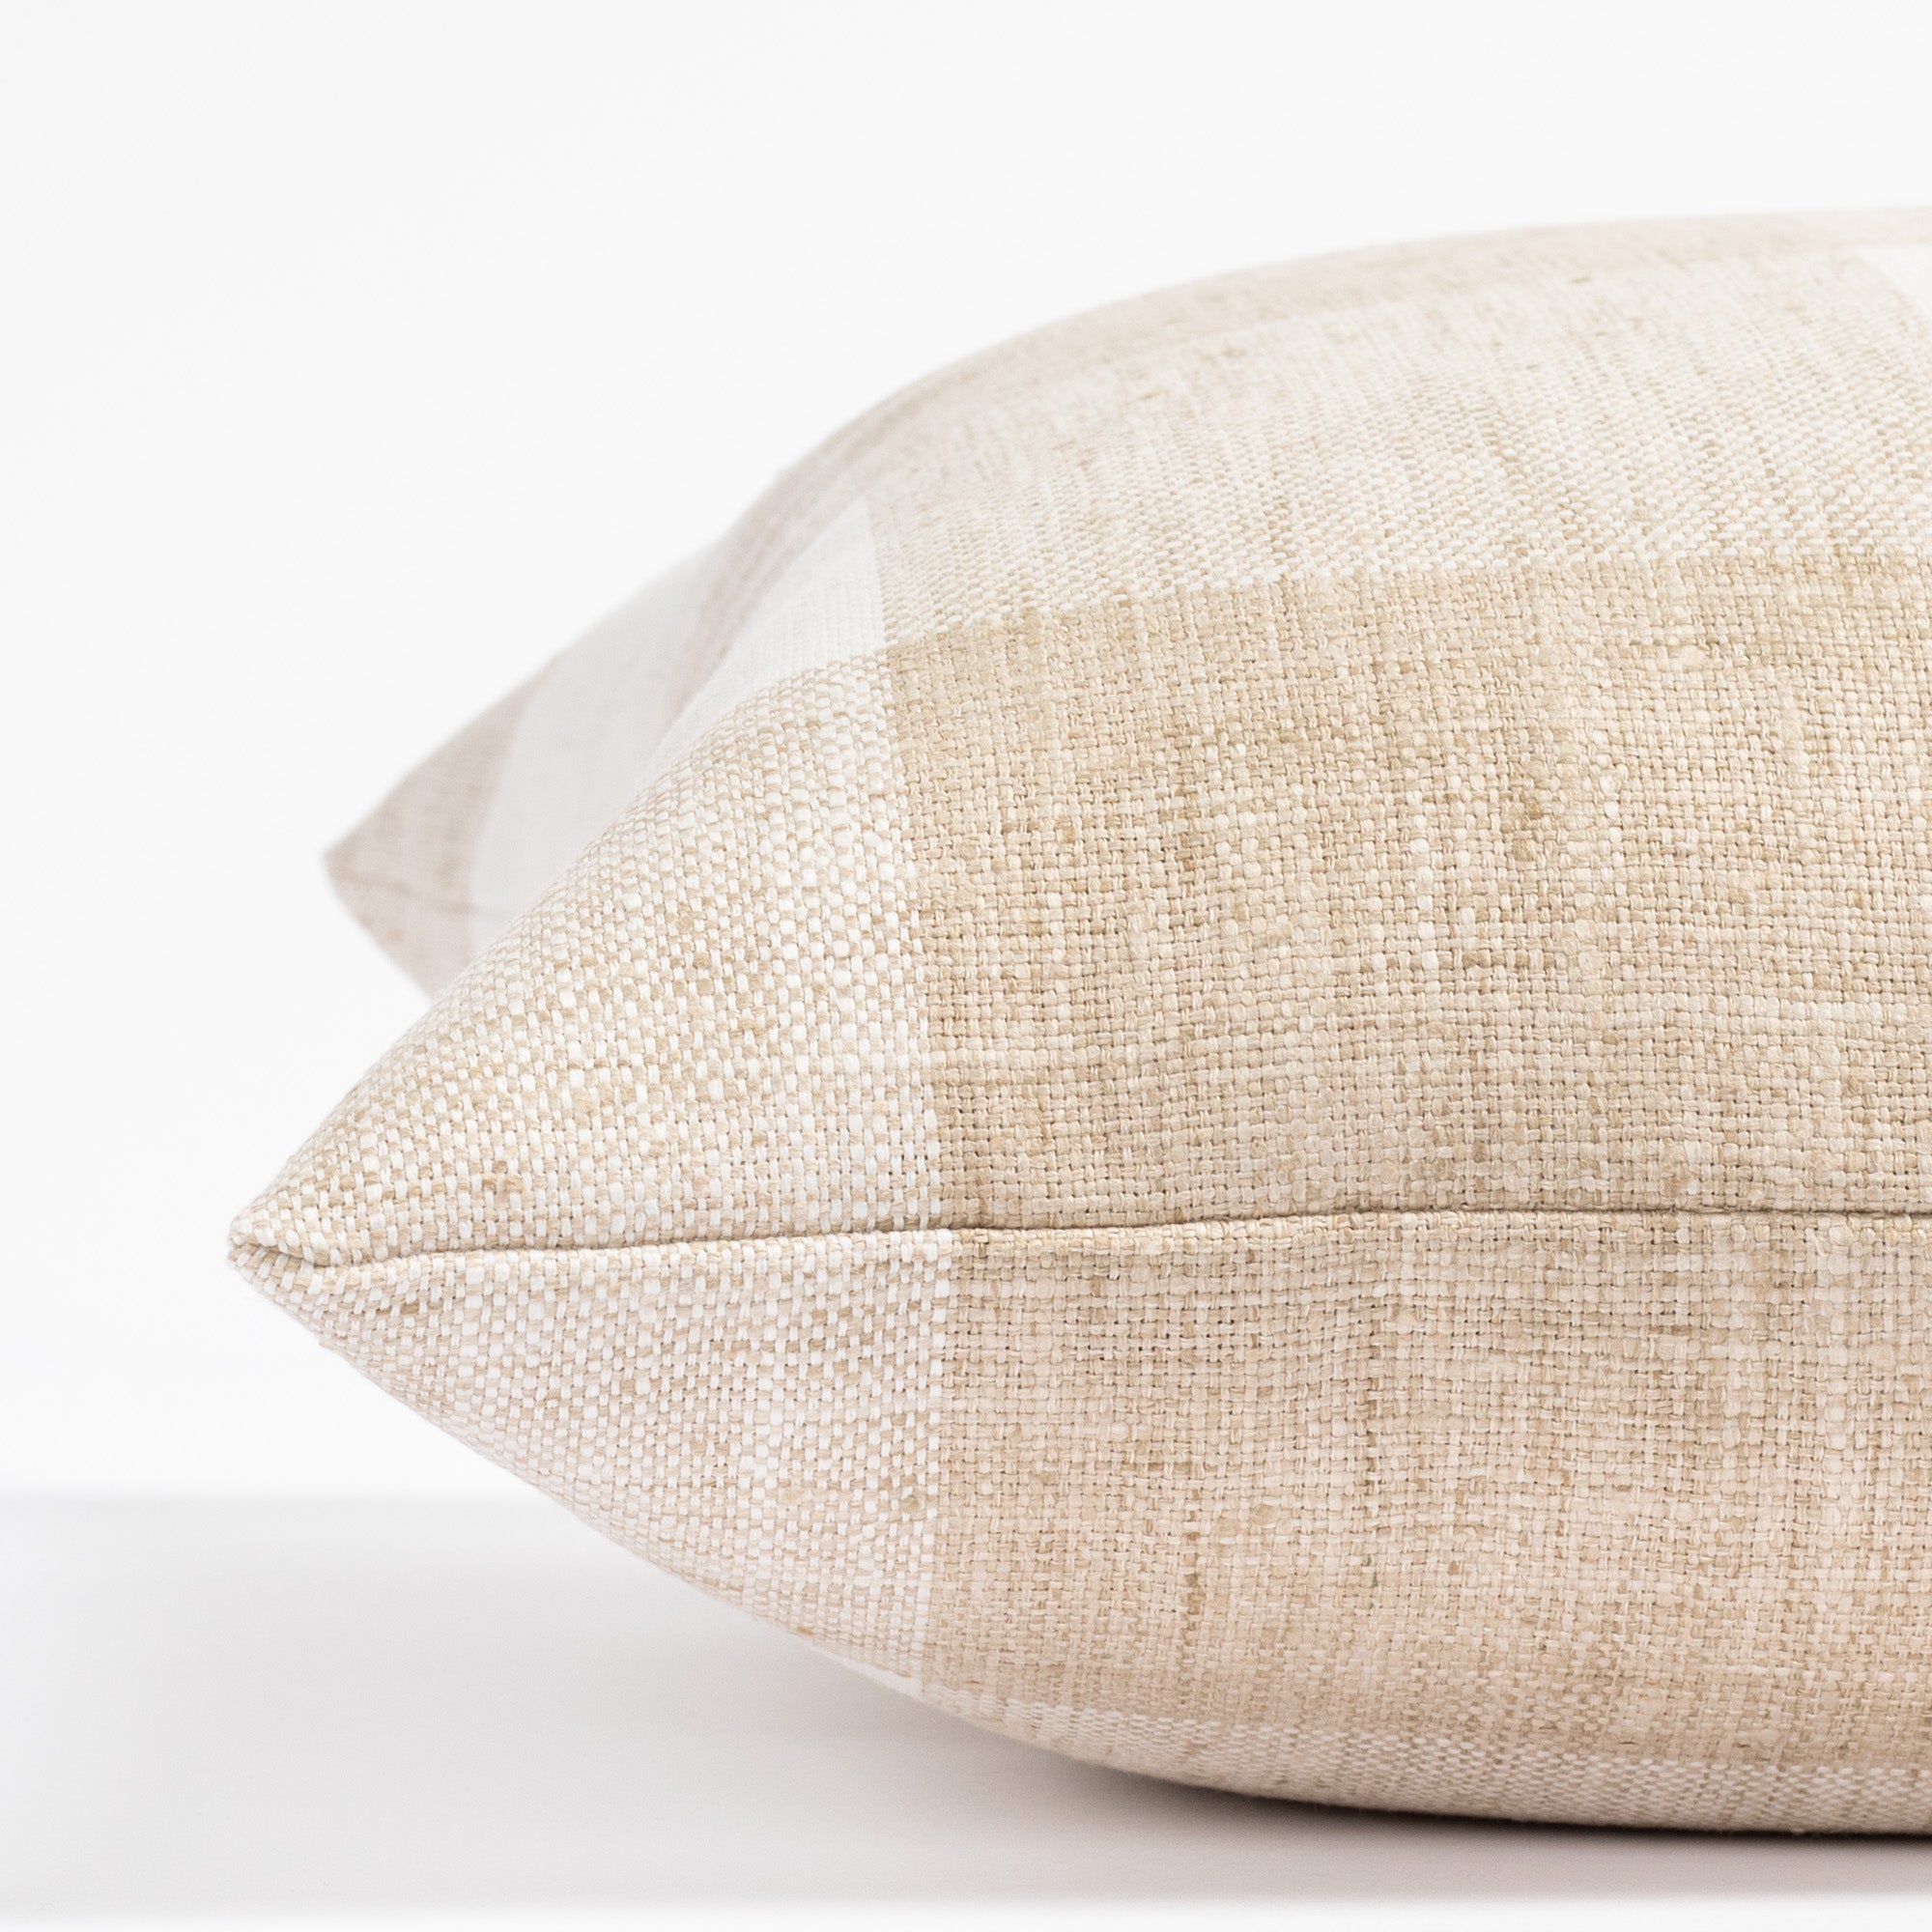 a white and beige check patterned throw pillow : close up side view